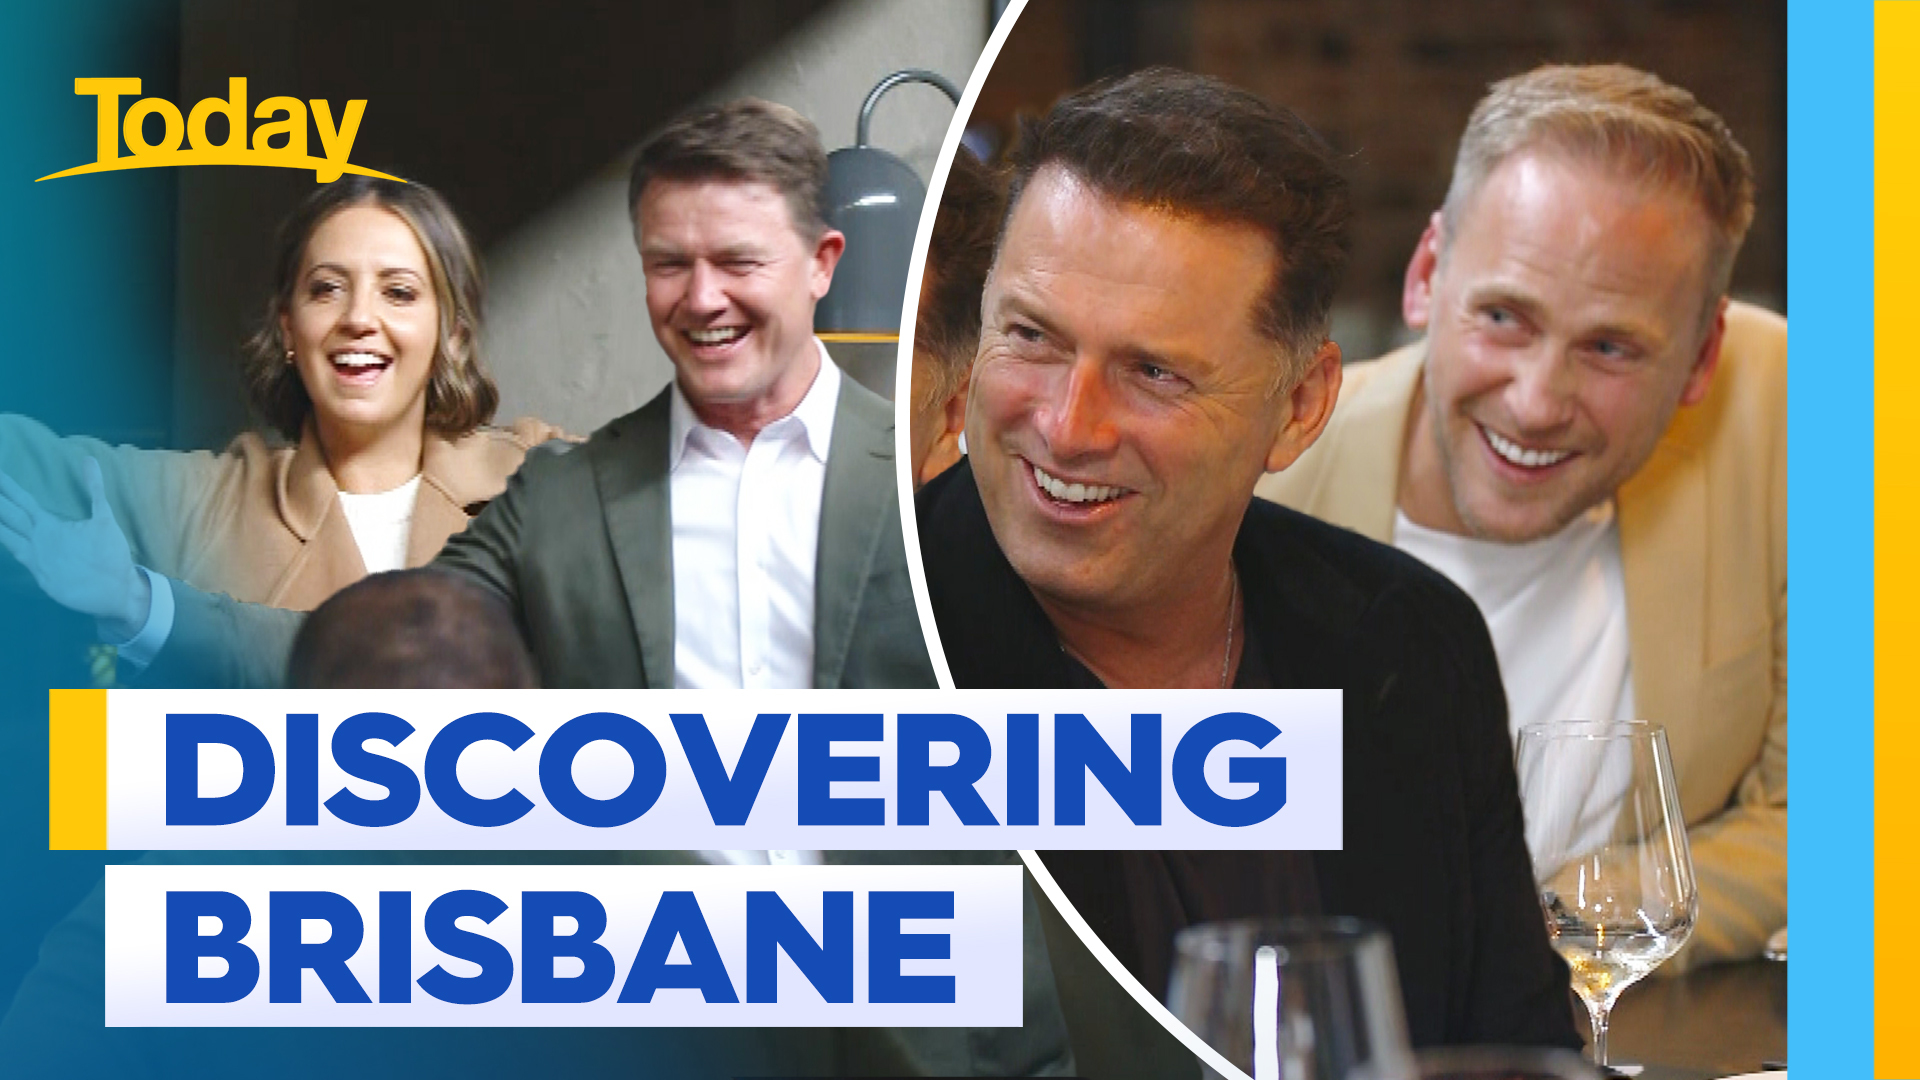 Today hosts discover Brisbane